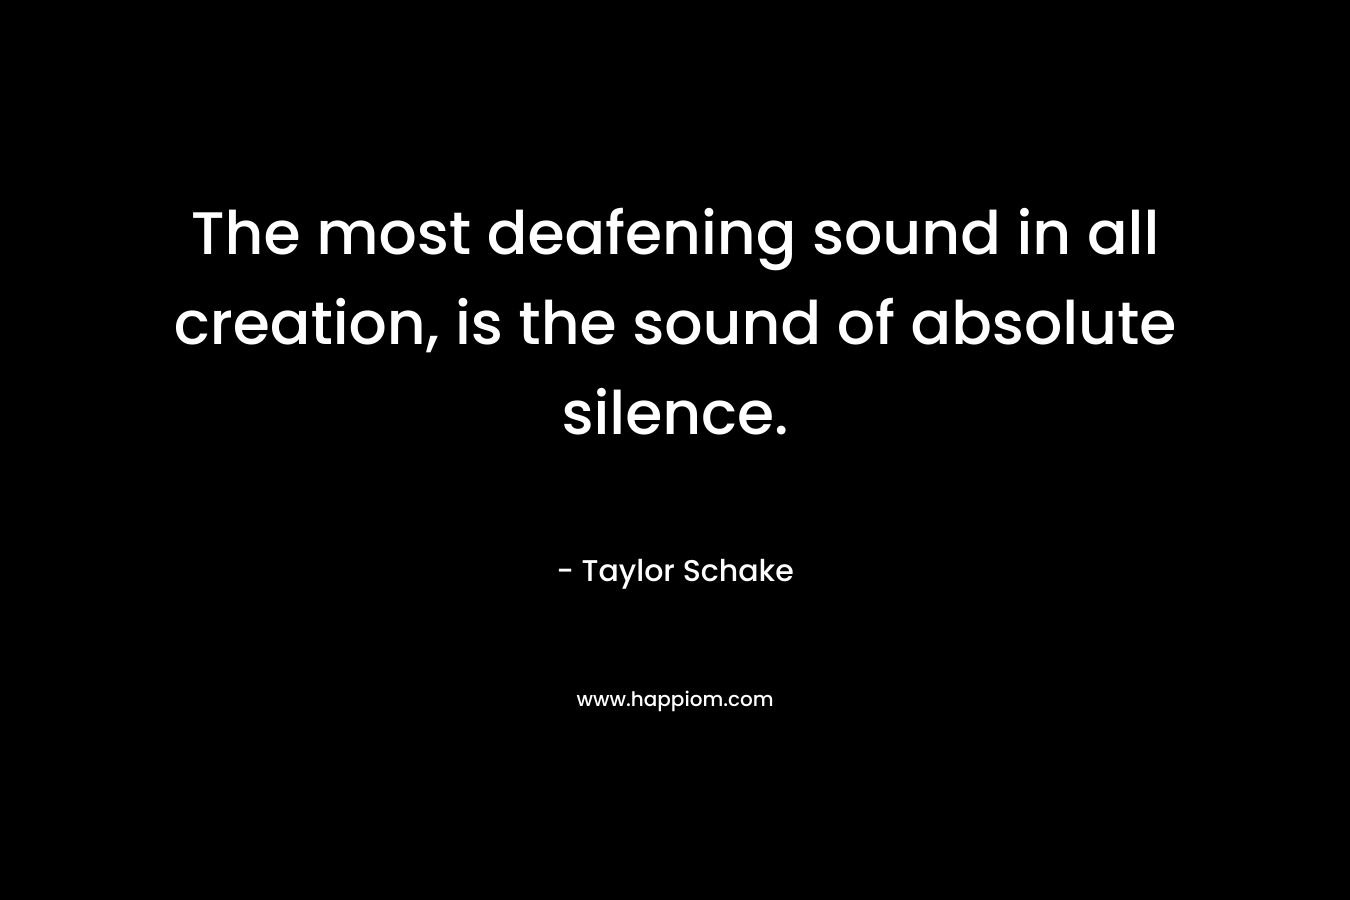 The most deafening sound in all creation, is the sound of absolute silence.